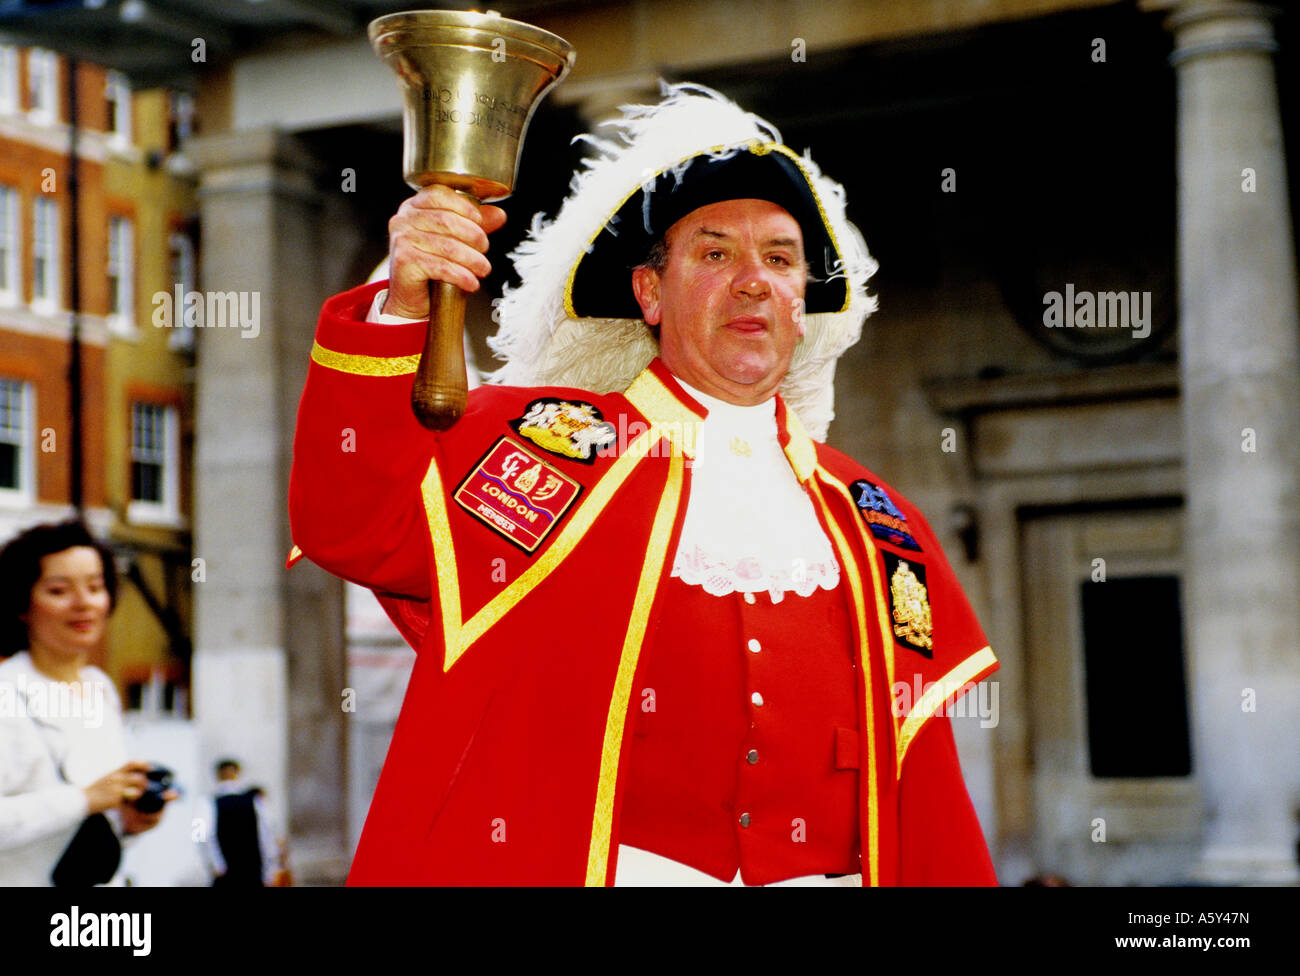 Town Cryer and Bell ringer in Covent garden London England Stock Photo